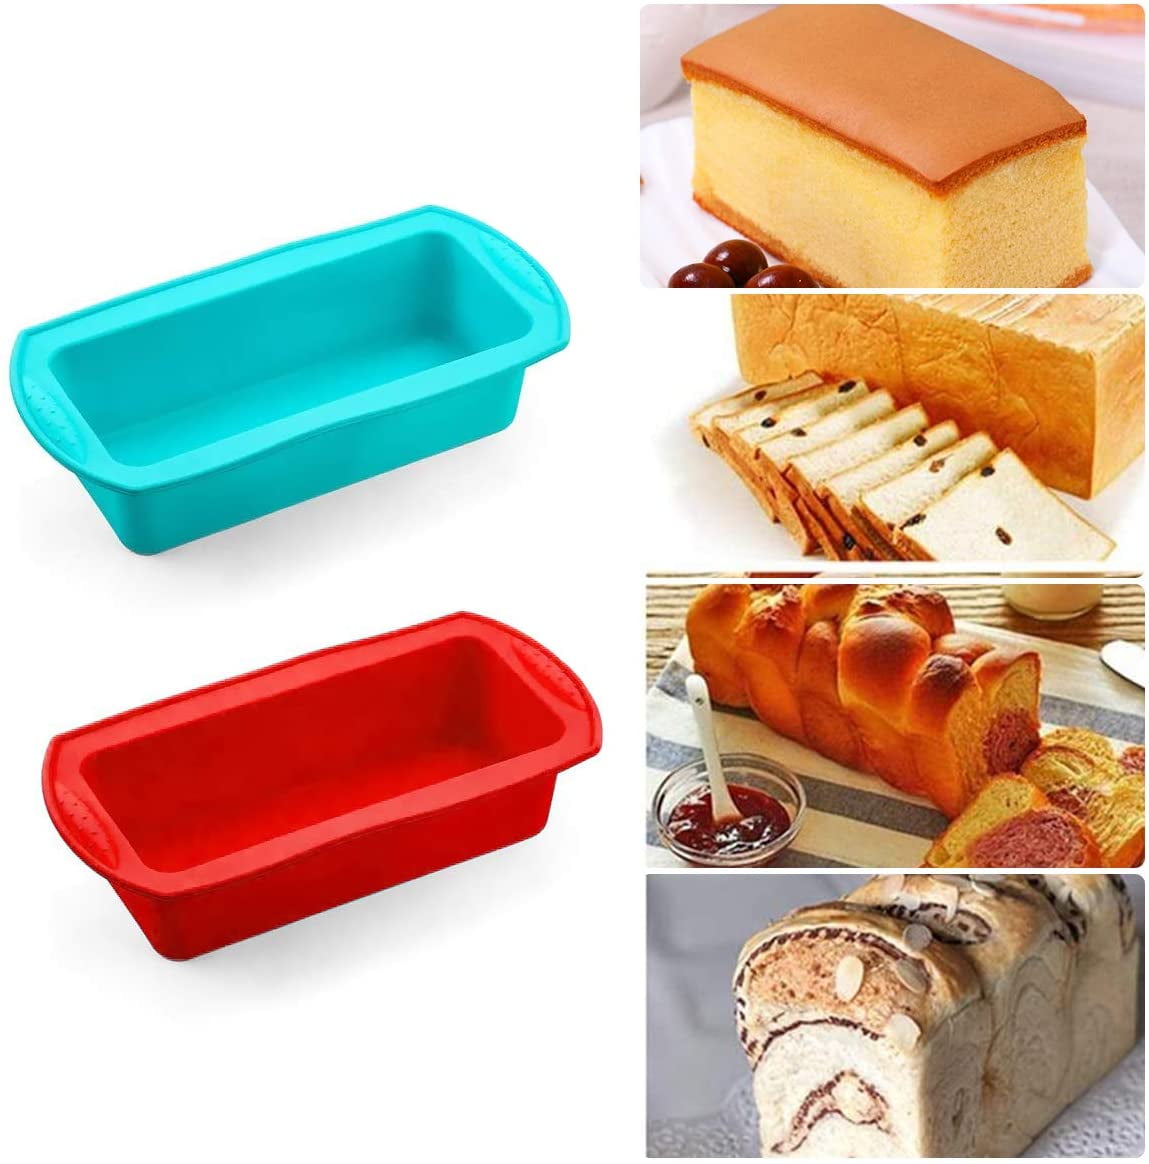 Silicone Large Cake Mold Toast Loaf Chocolate Bakeware Bread Pan  Baking Tool 